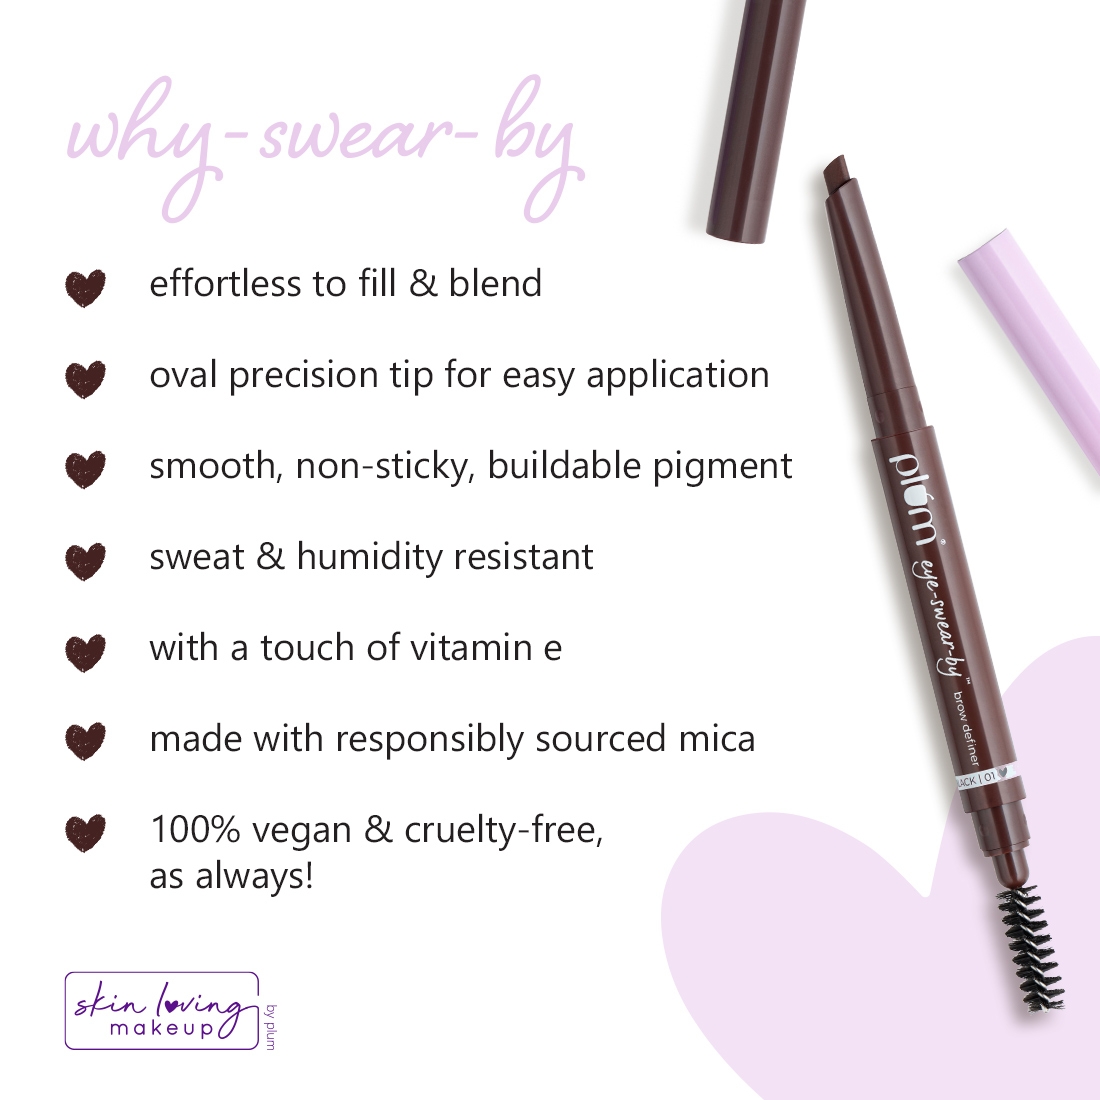 plum be good | Plum Eye-Swear-By Brow Definer - Umber Brown | Buildable Pigment | With Vitamin E | 100% Vegan & Cruelty Free 1